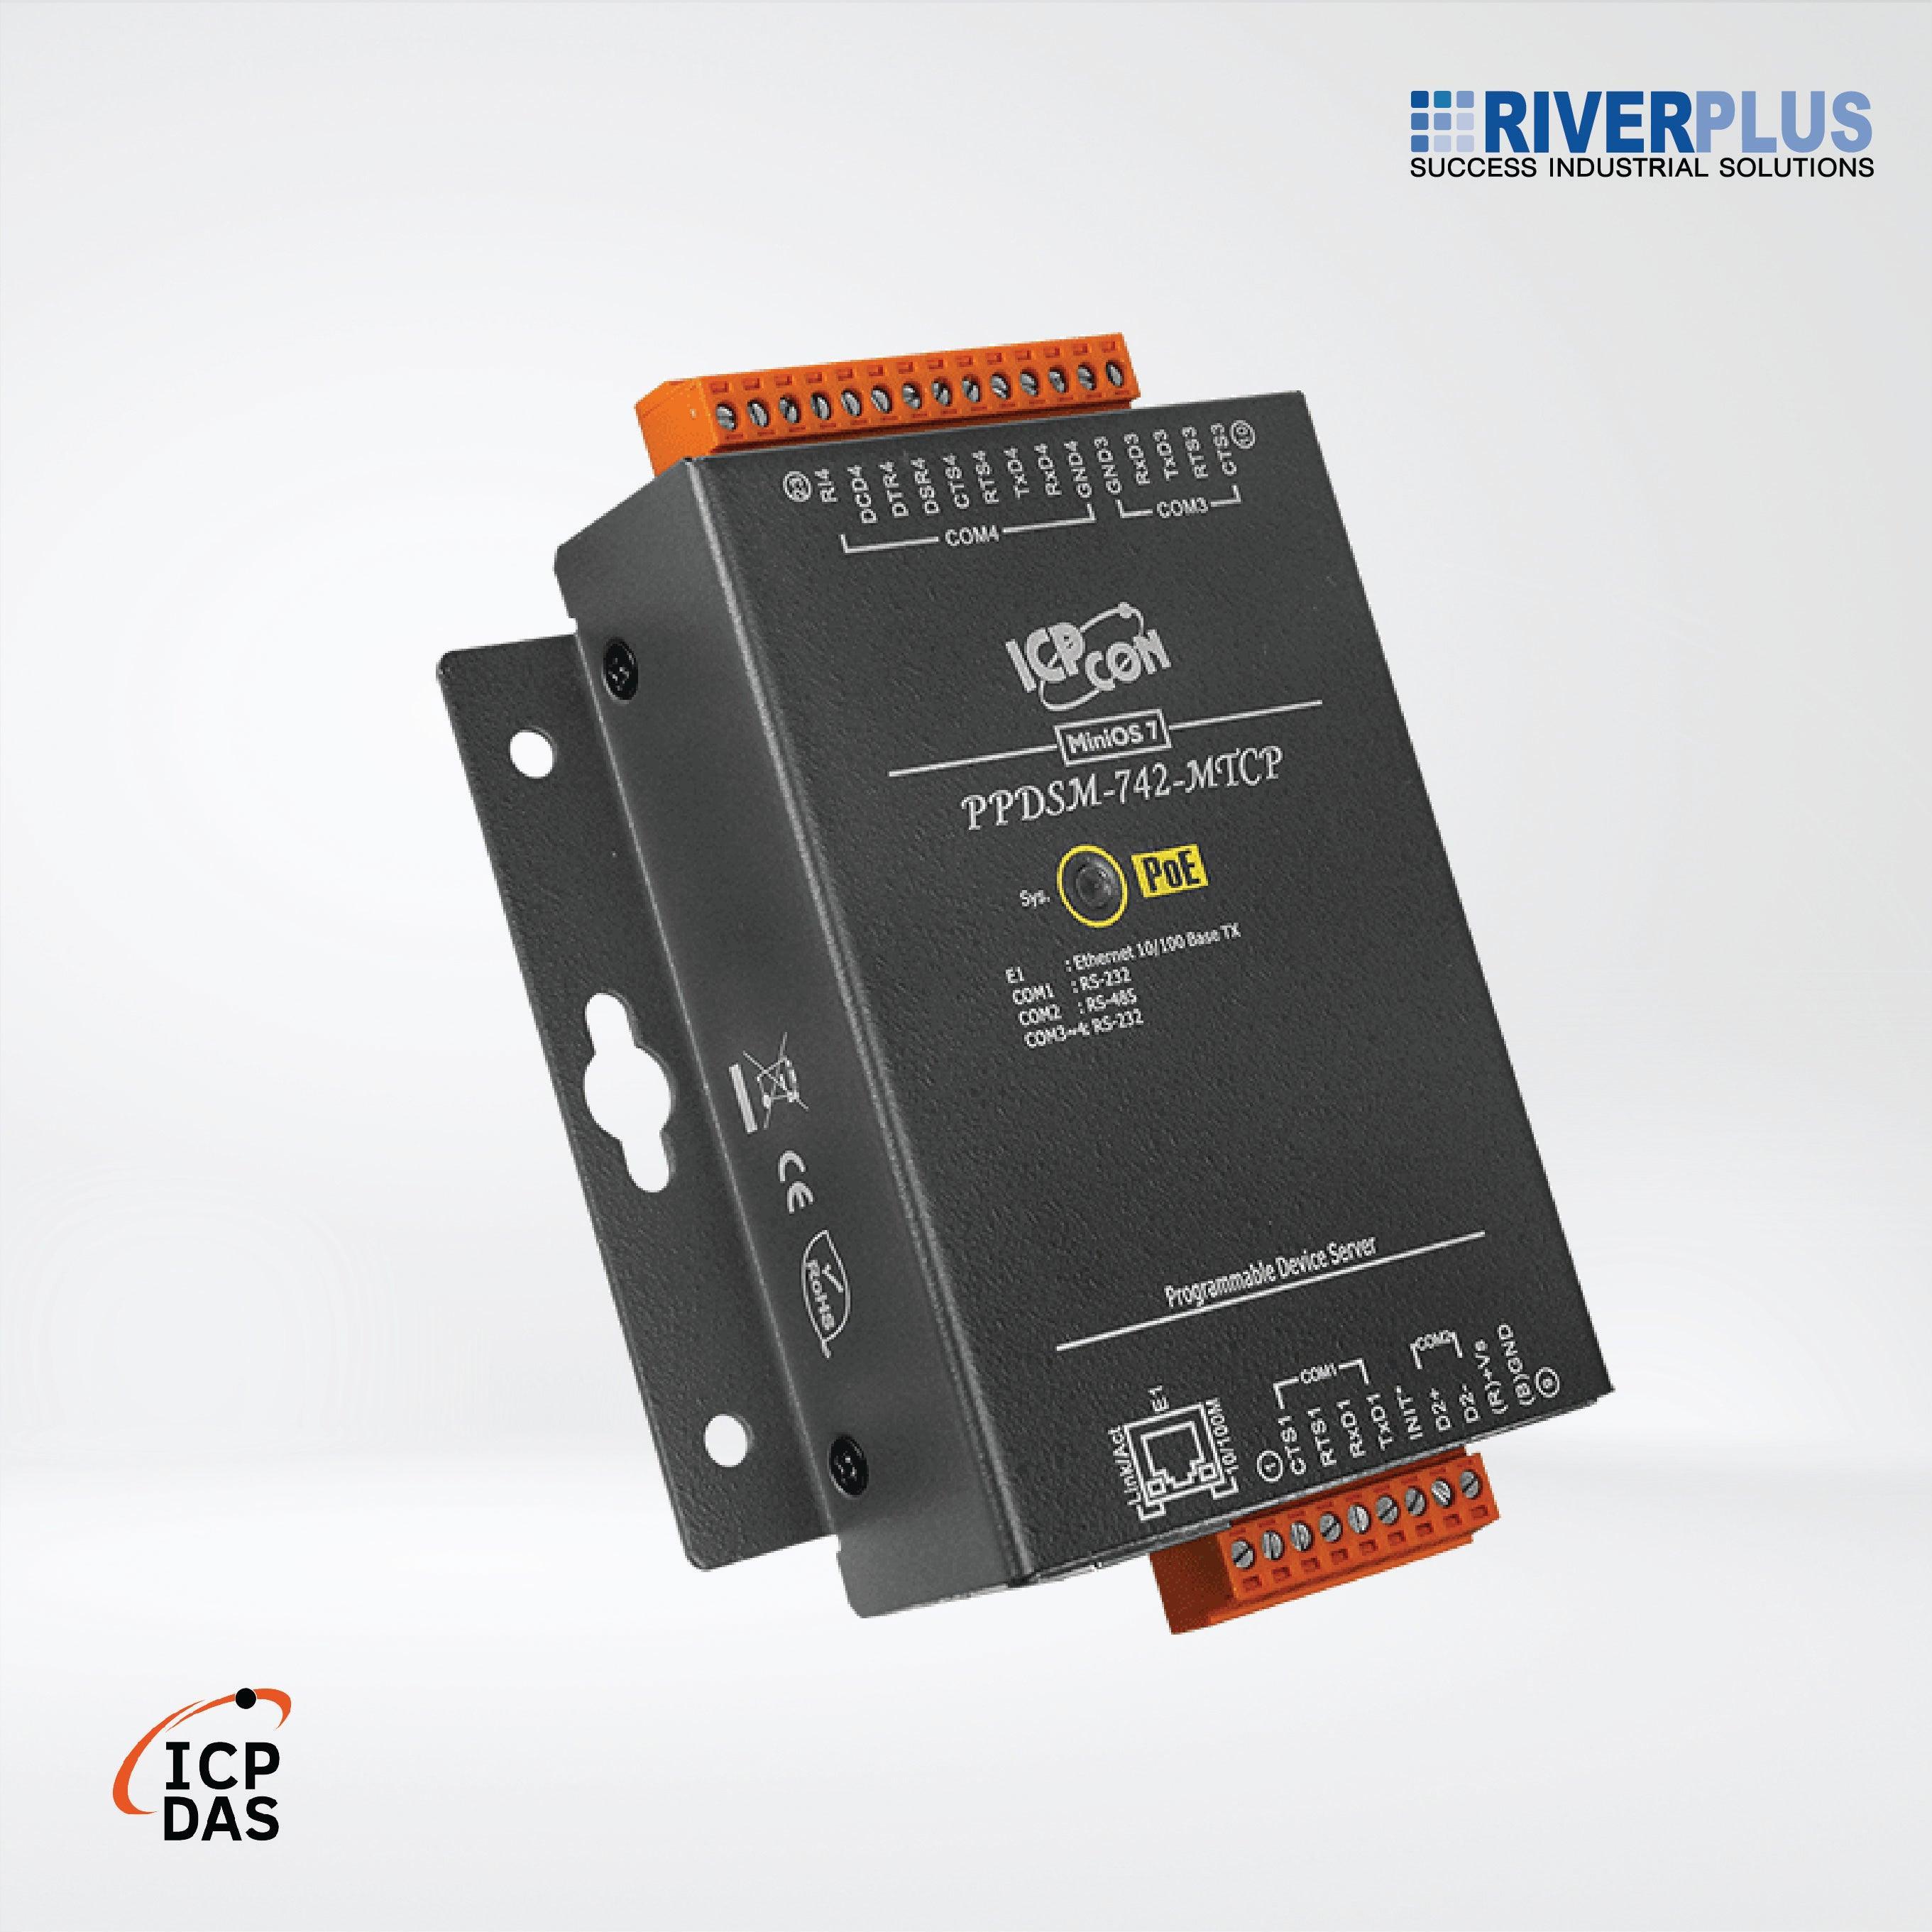 PPDSM-742-MTCP Programmable (3x RS-232 and 1x RS-485) Serial-to-Ethernet Device Server - Riverplus